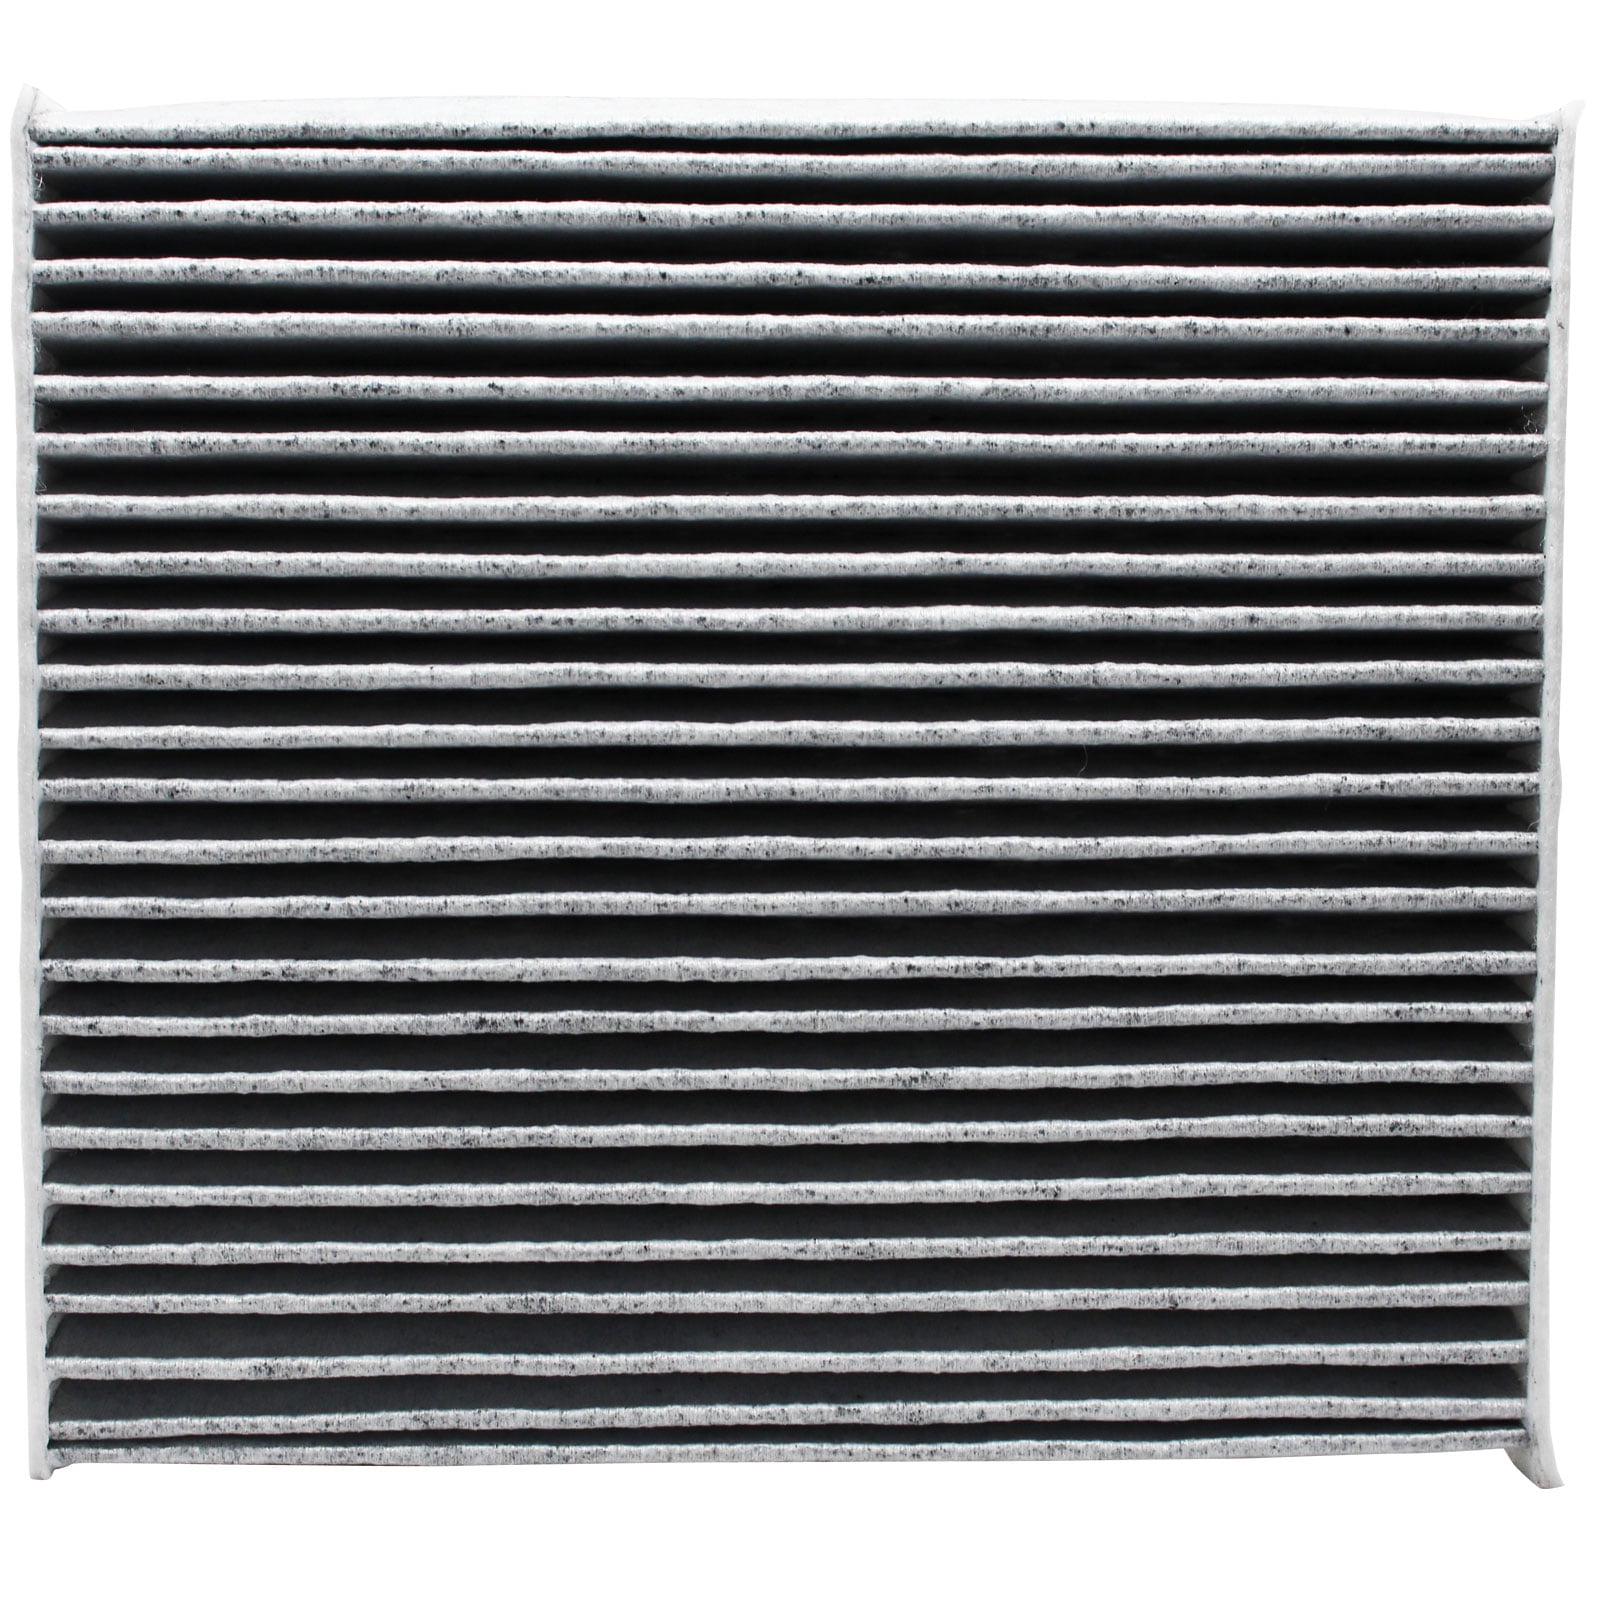 2015 Toyota Corolla Cabin Air Filter Replacement